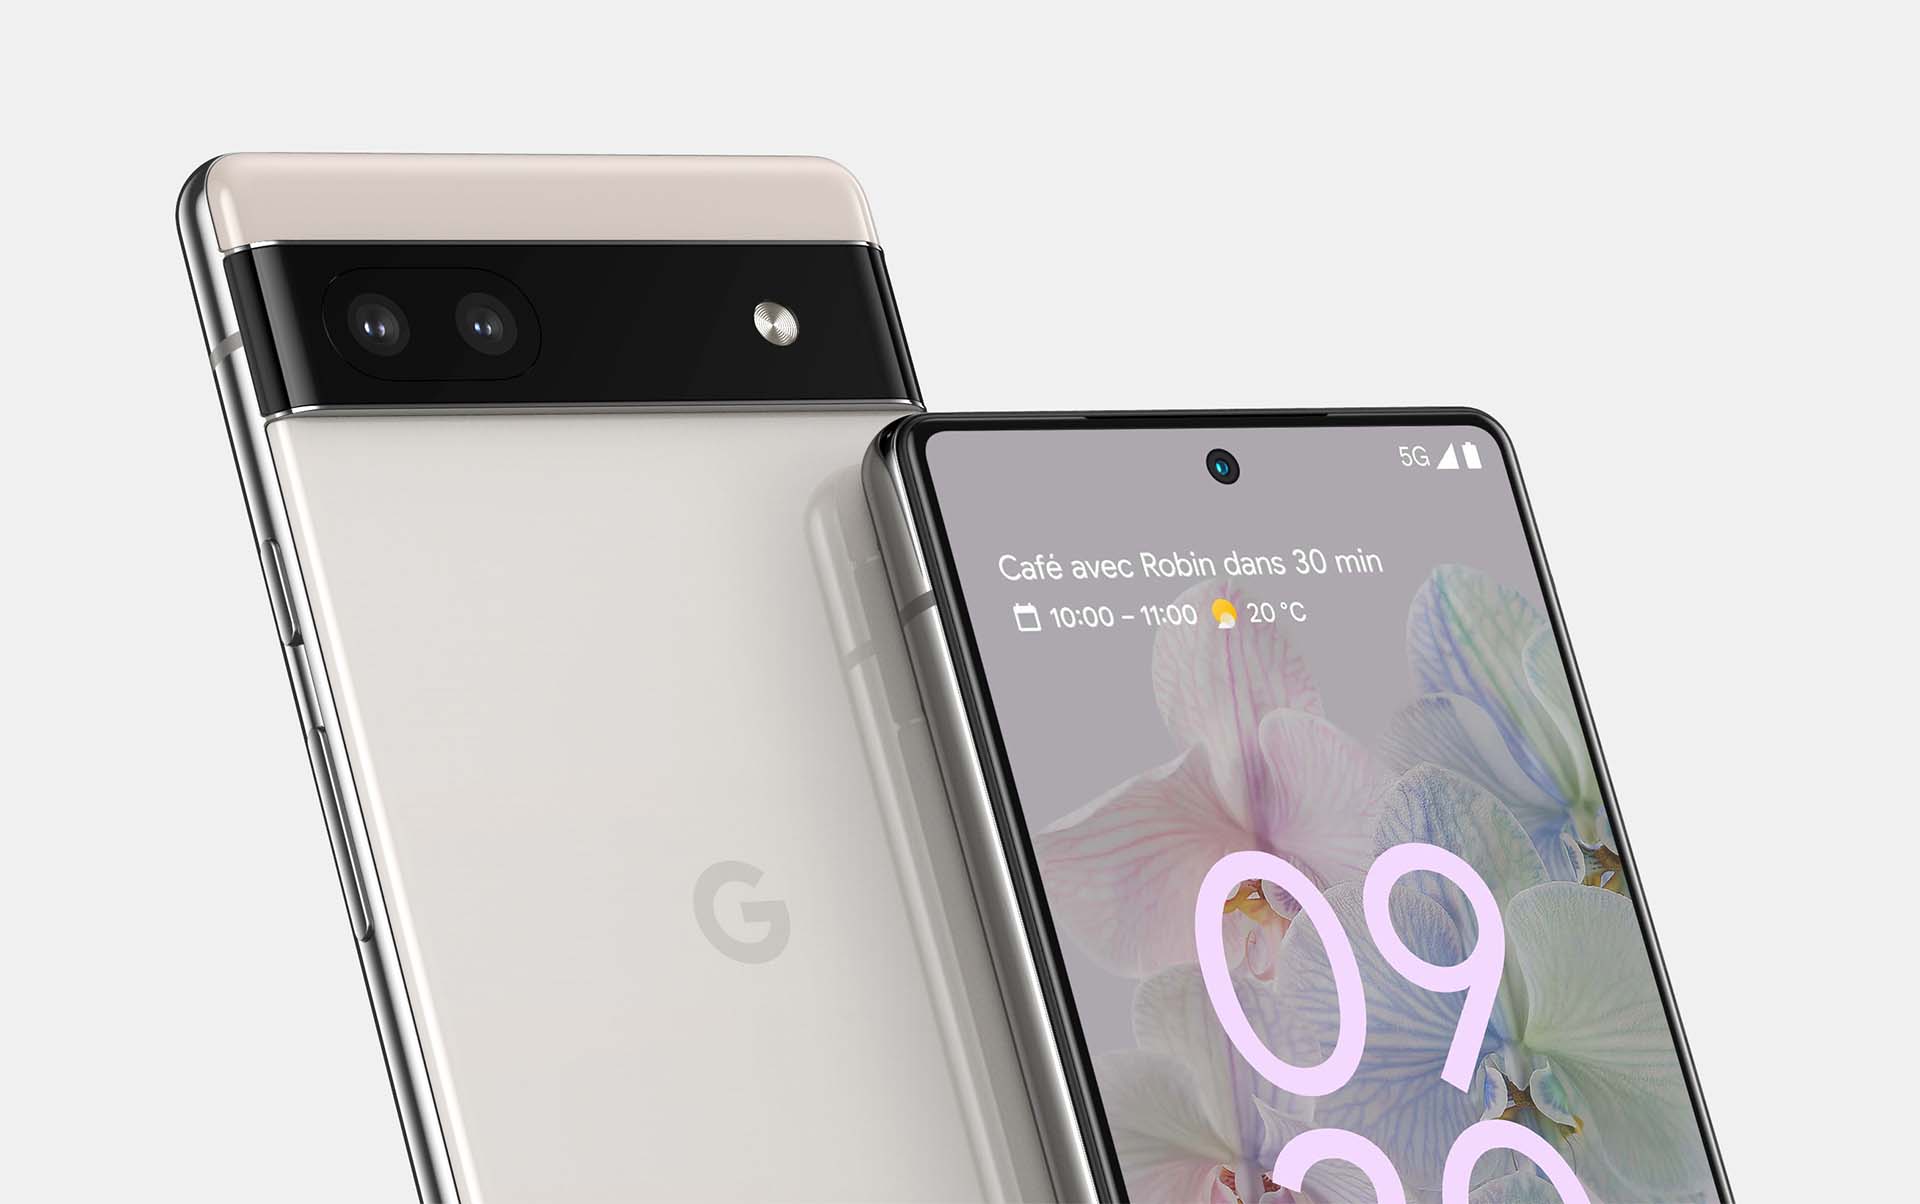 The features and expected price of Google Pixel 6a • Mezha.Media have become known